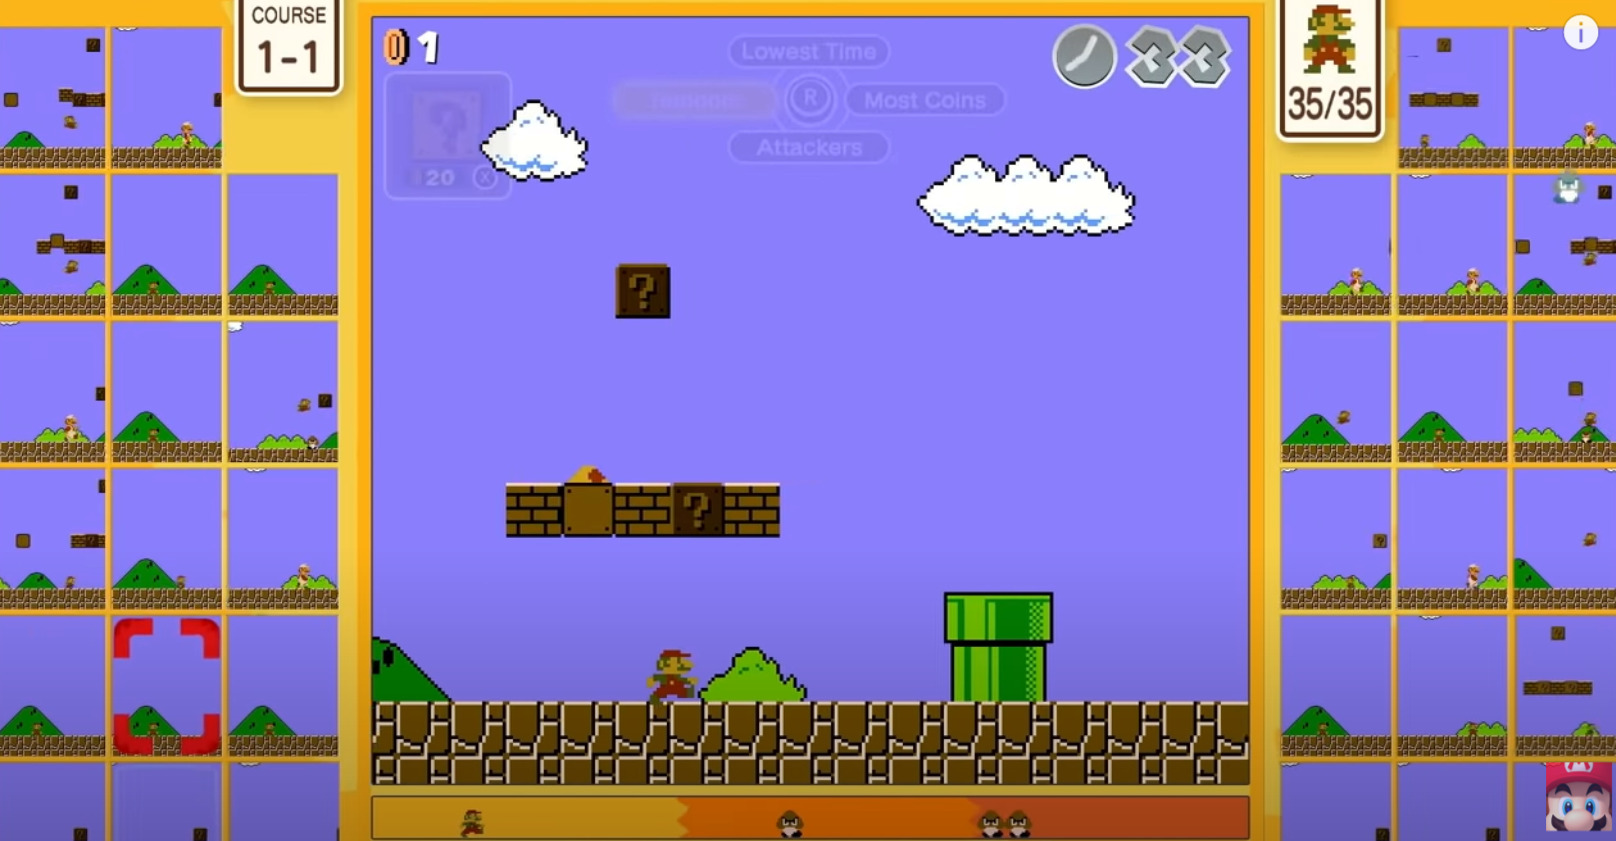 Super Mario 35 Battle Royale Is Now Available Online For The Nintendo Switch 100% Free Of Charge